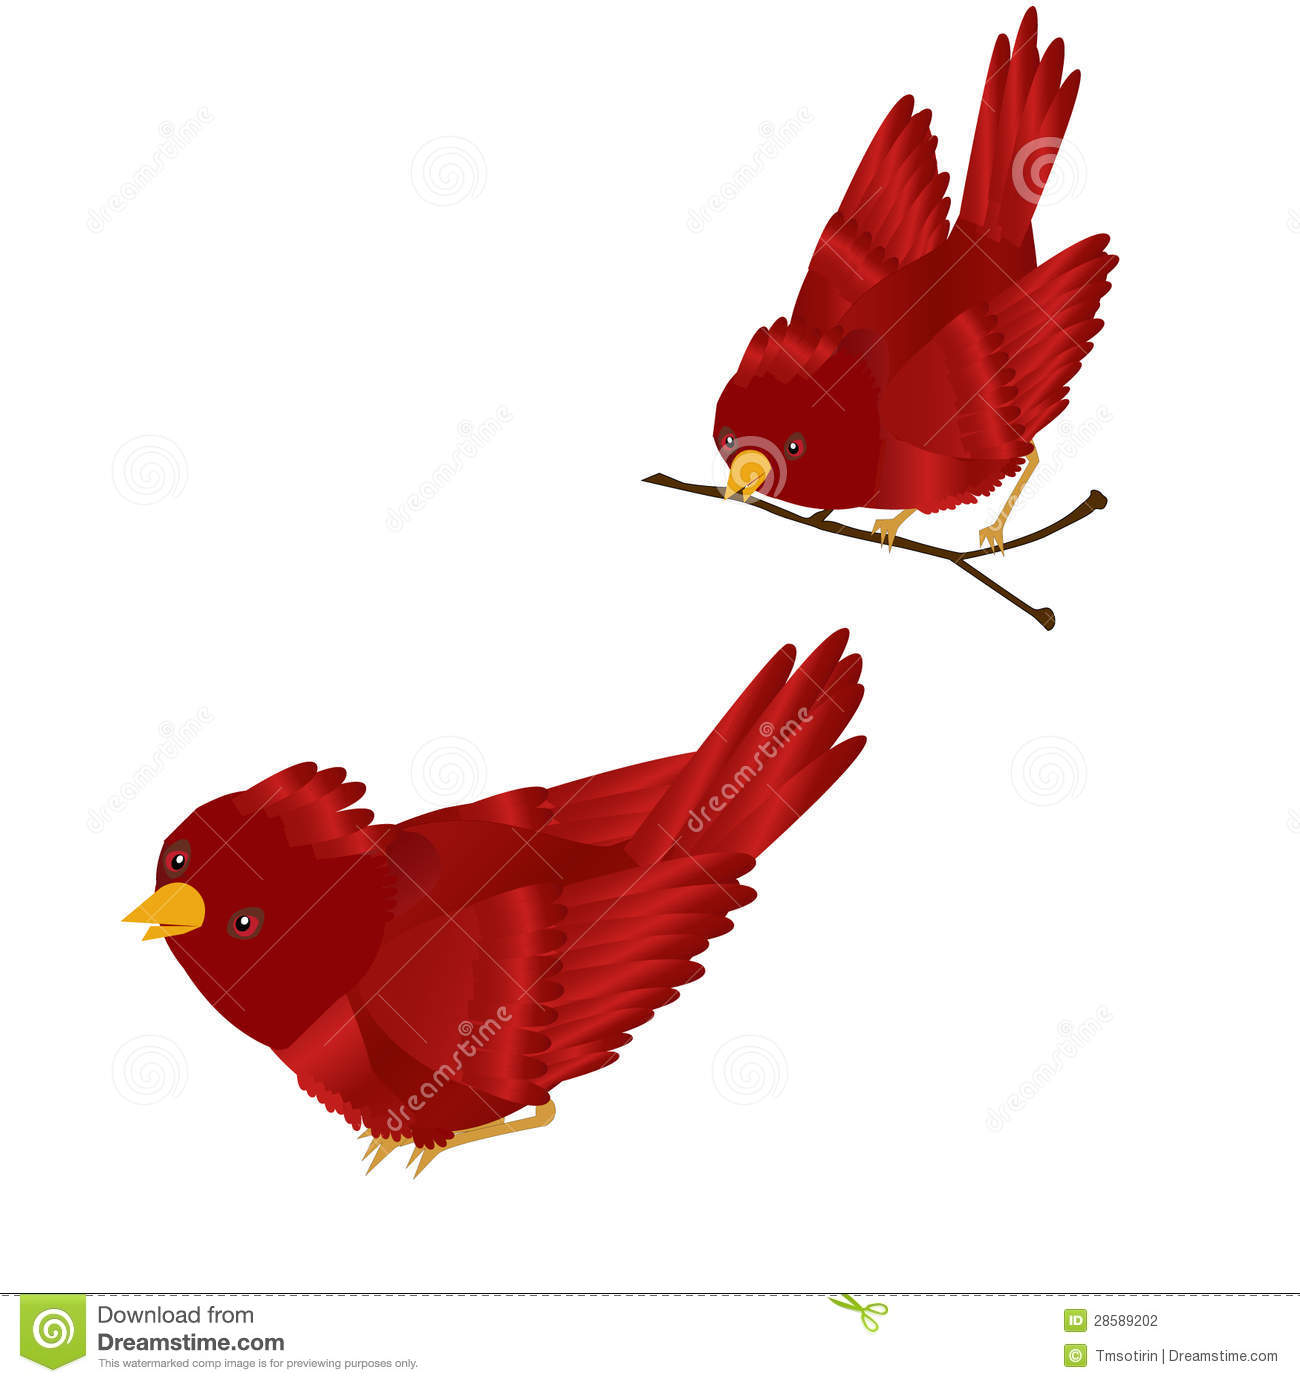 Use This Bright Red Cardinal Graphic To Brighten Winter Or Spring